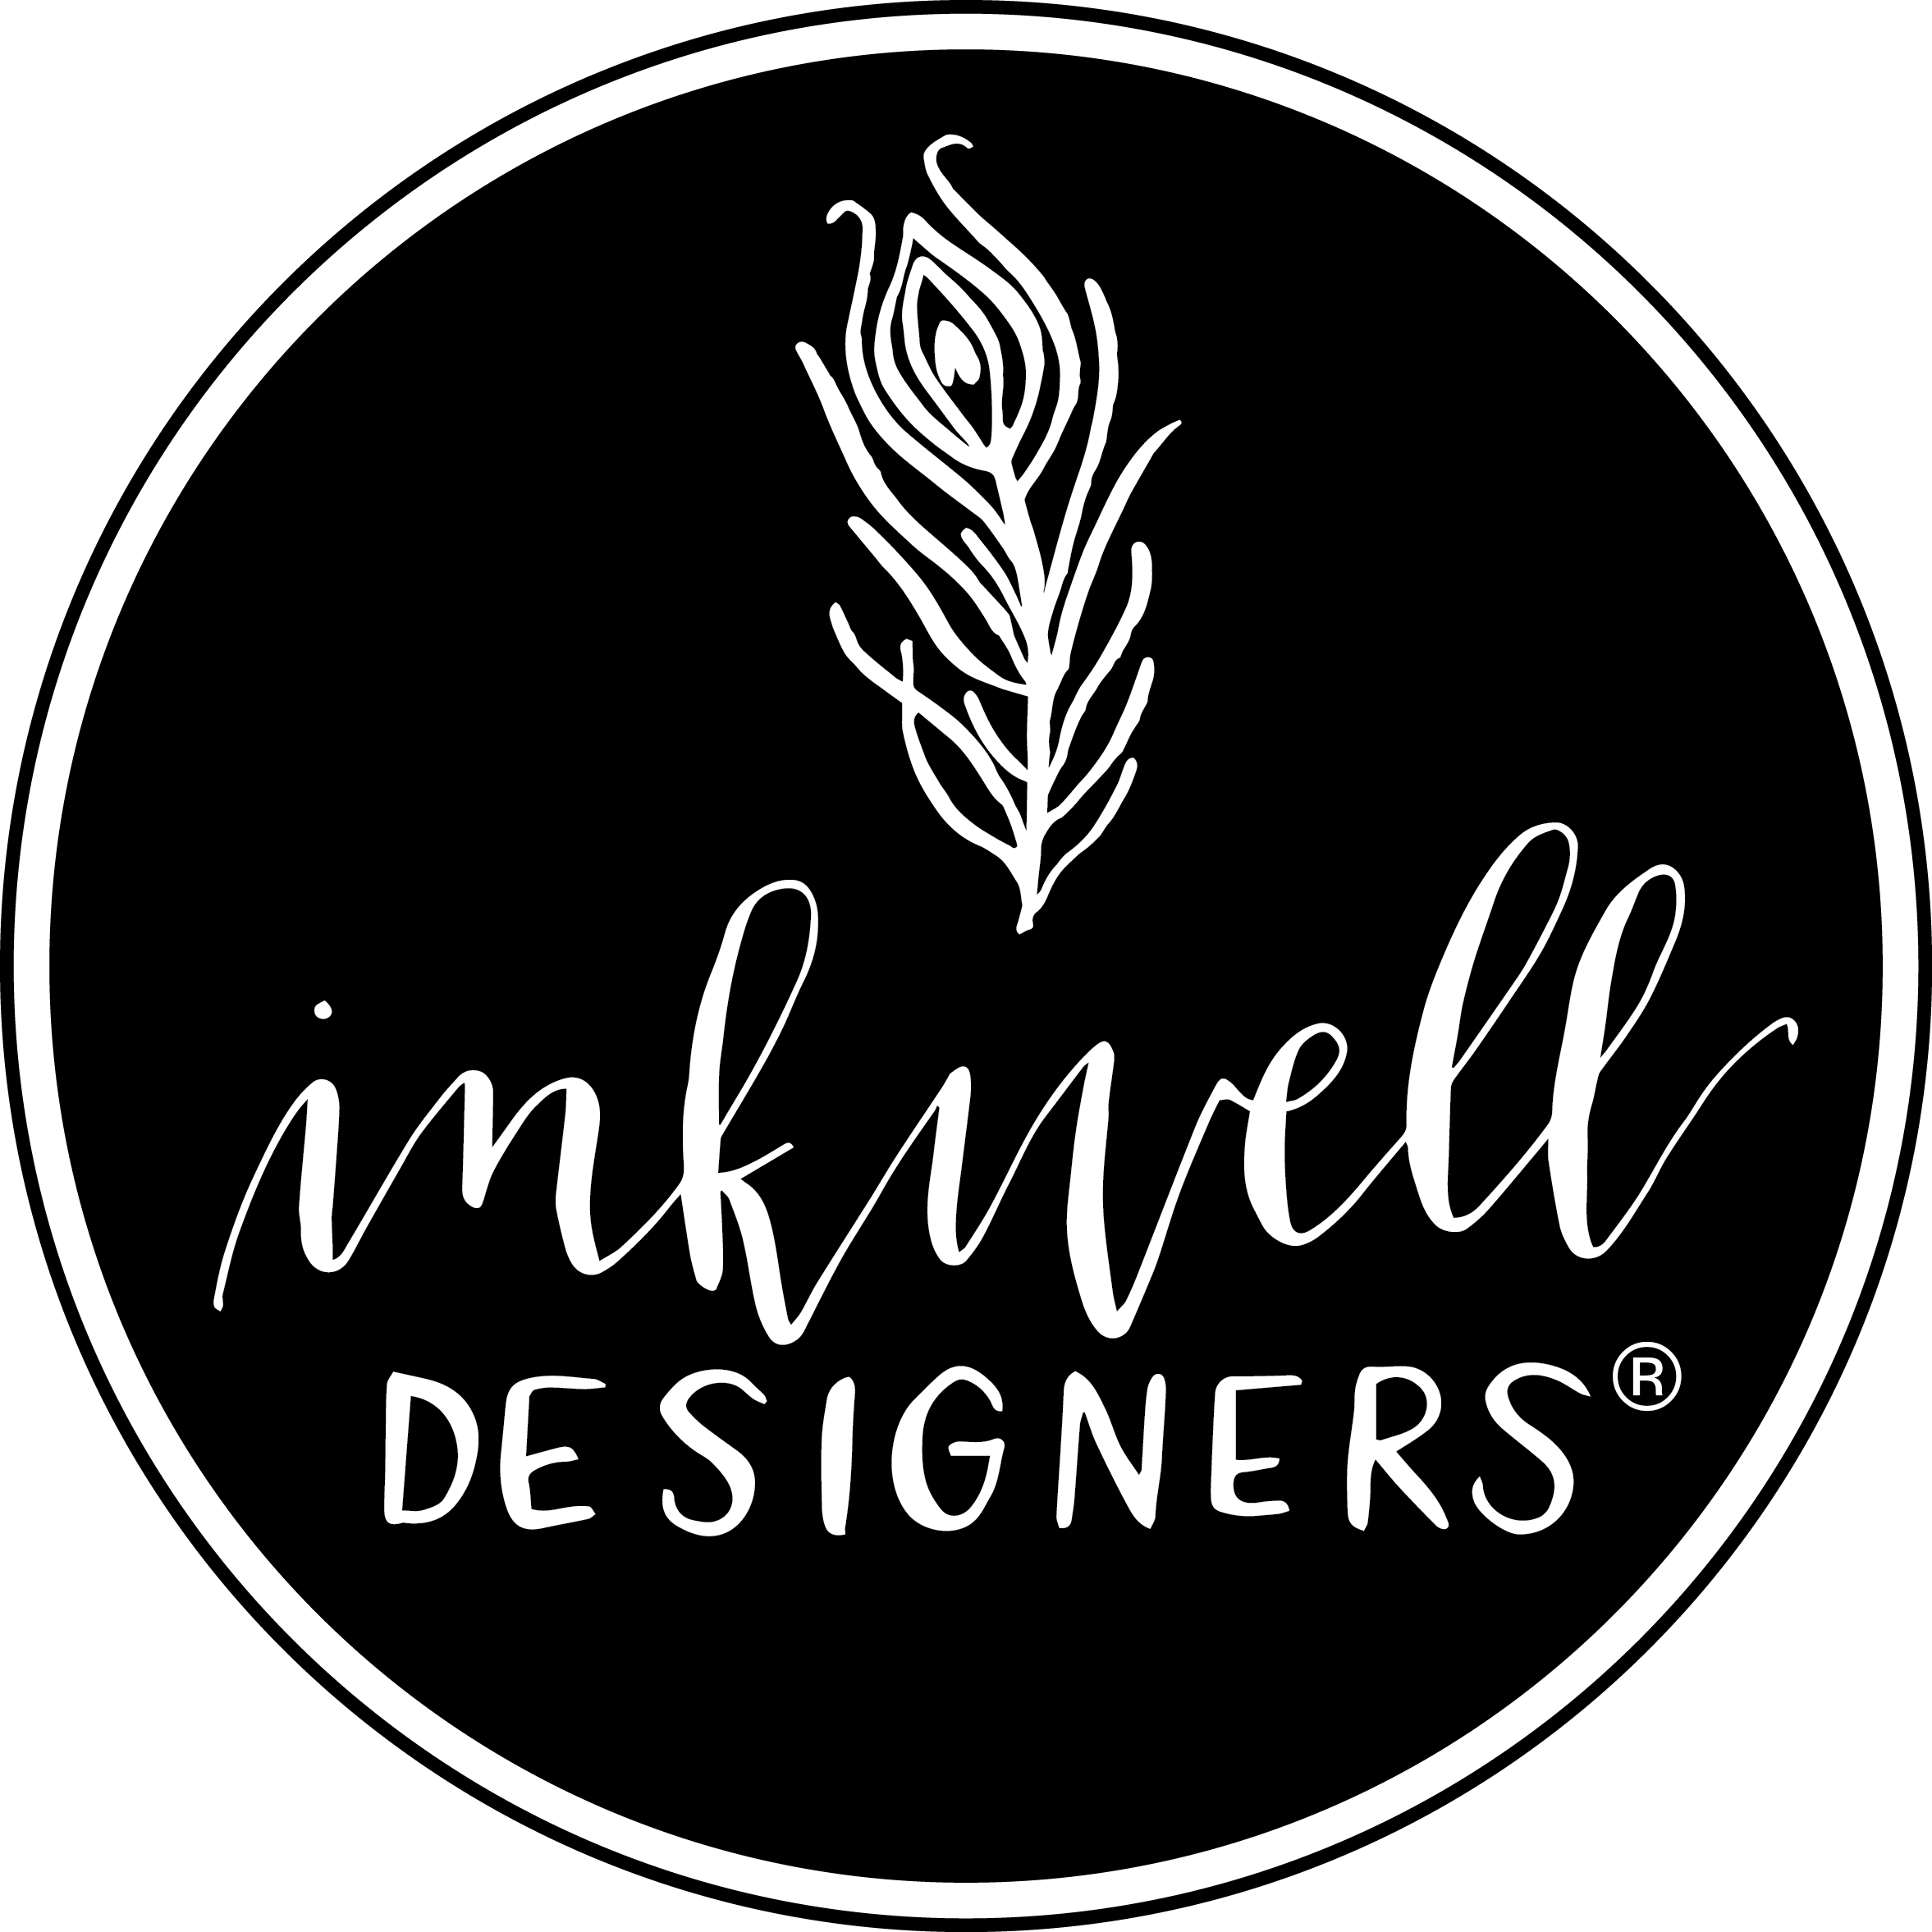 https://www.inkwelldesigners.com/wp-content/uploads/2019/12/inkwell-paths-1.png